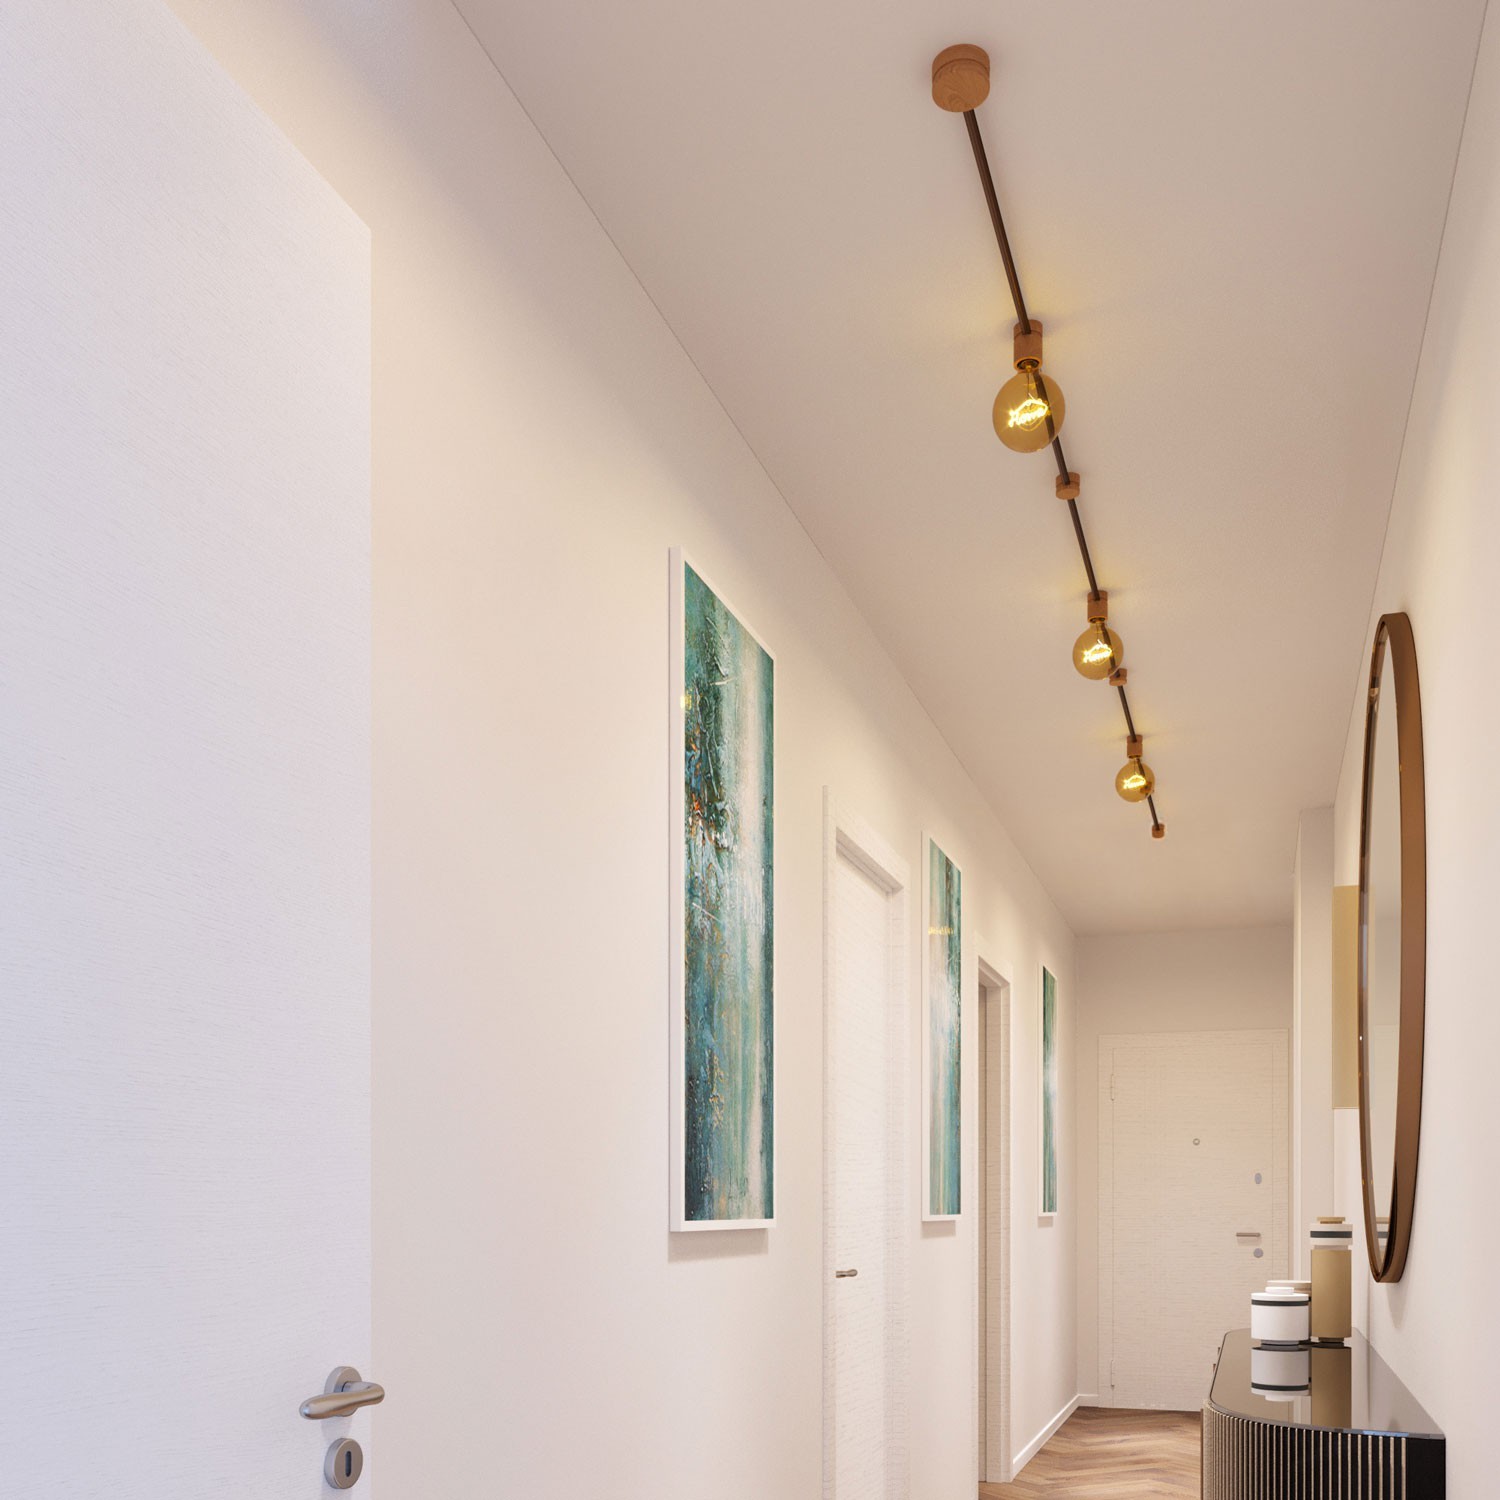 Filé System Linear Kit - with 5m string light cable and 7 indoor wooden components